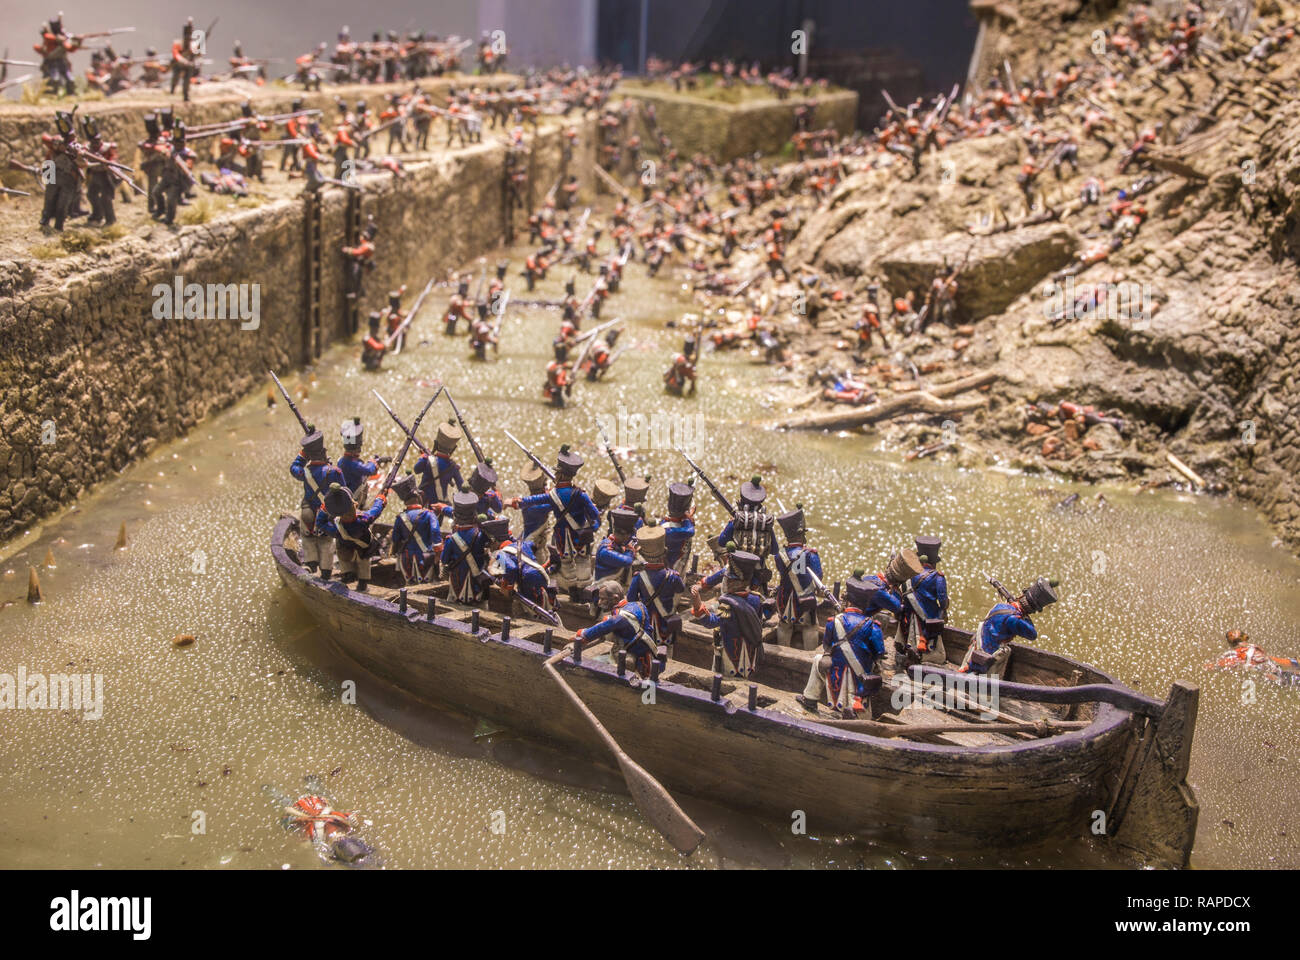 Badajoz, Spain - Dec 19th, 2018: Trinidad bastion breach assault. Storming of Badajoz, April 1812. Flooded ditch action. Scene recreated by diorama di Stock Photo